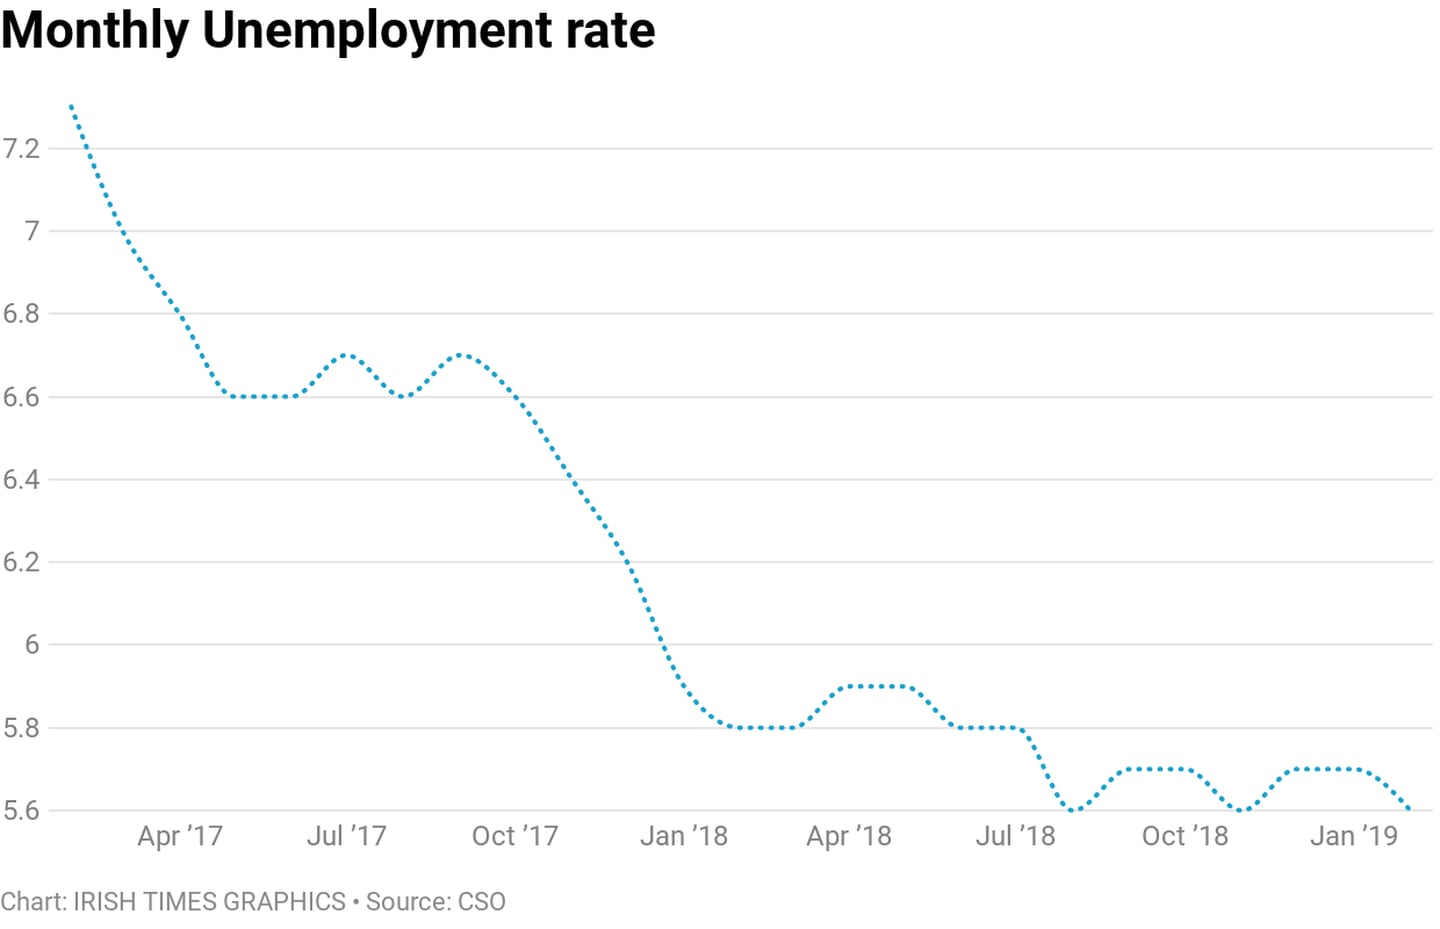 Unemployment rate revised up to 5.6 but overall trend ‘still downward